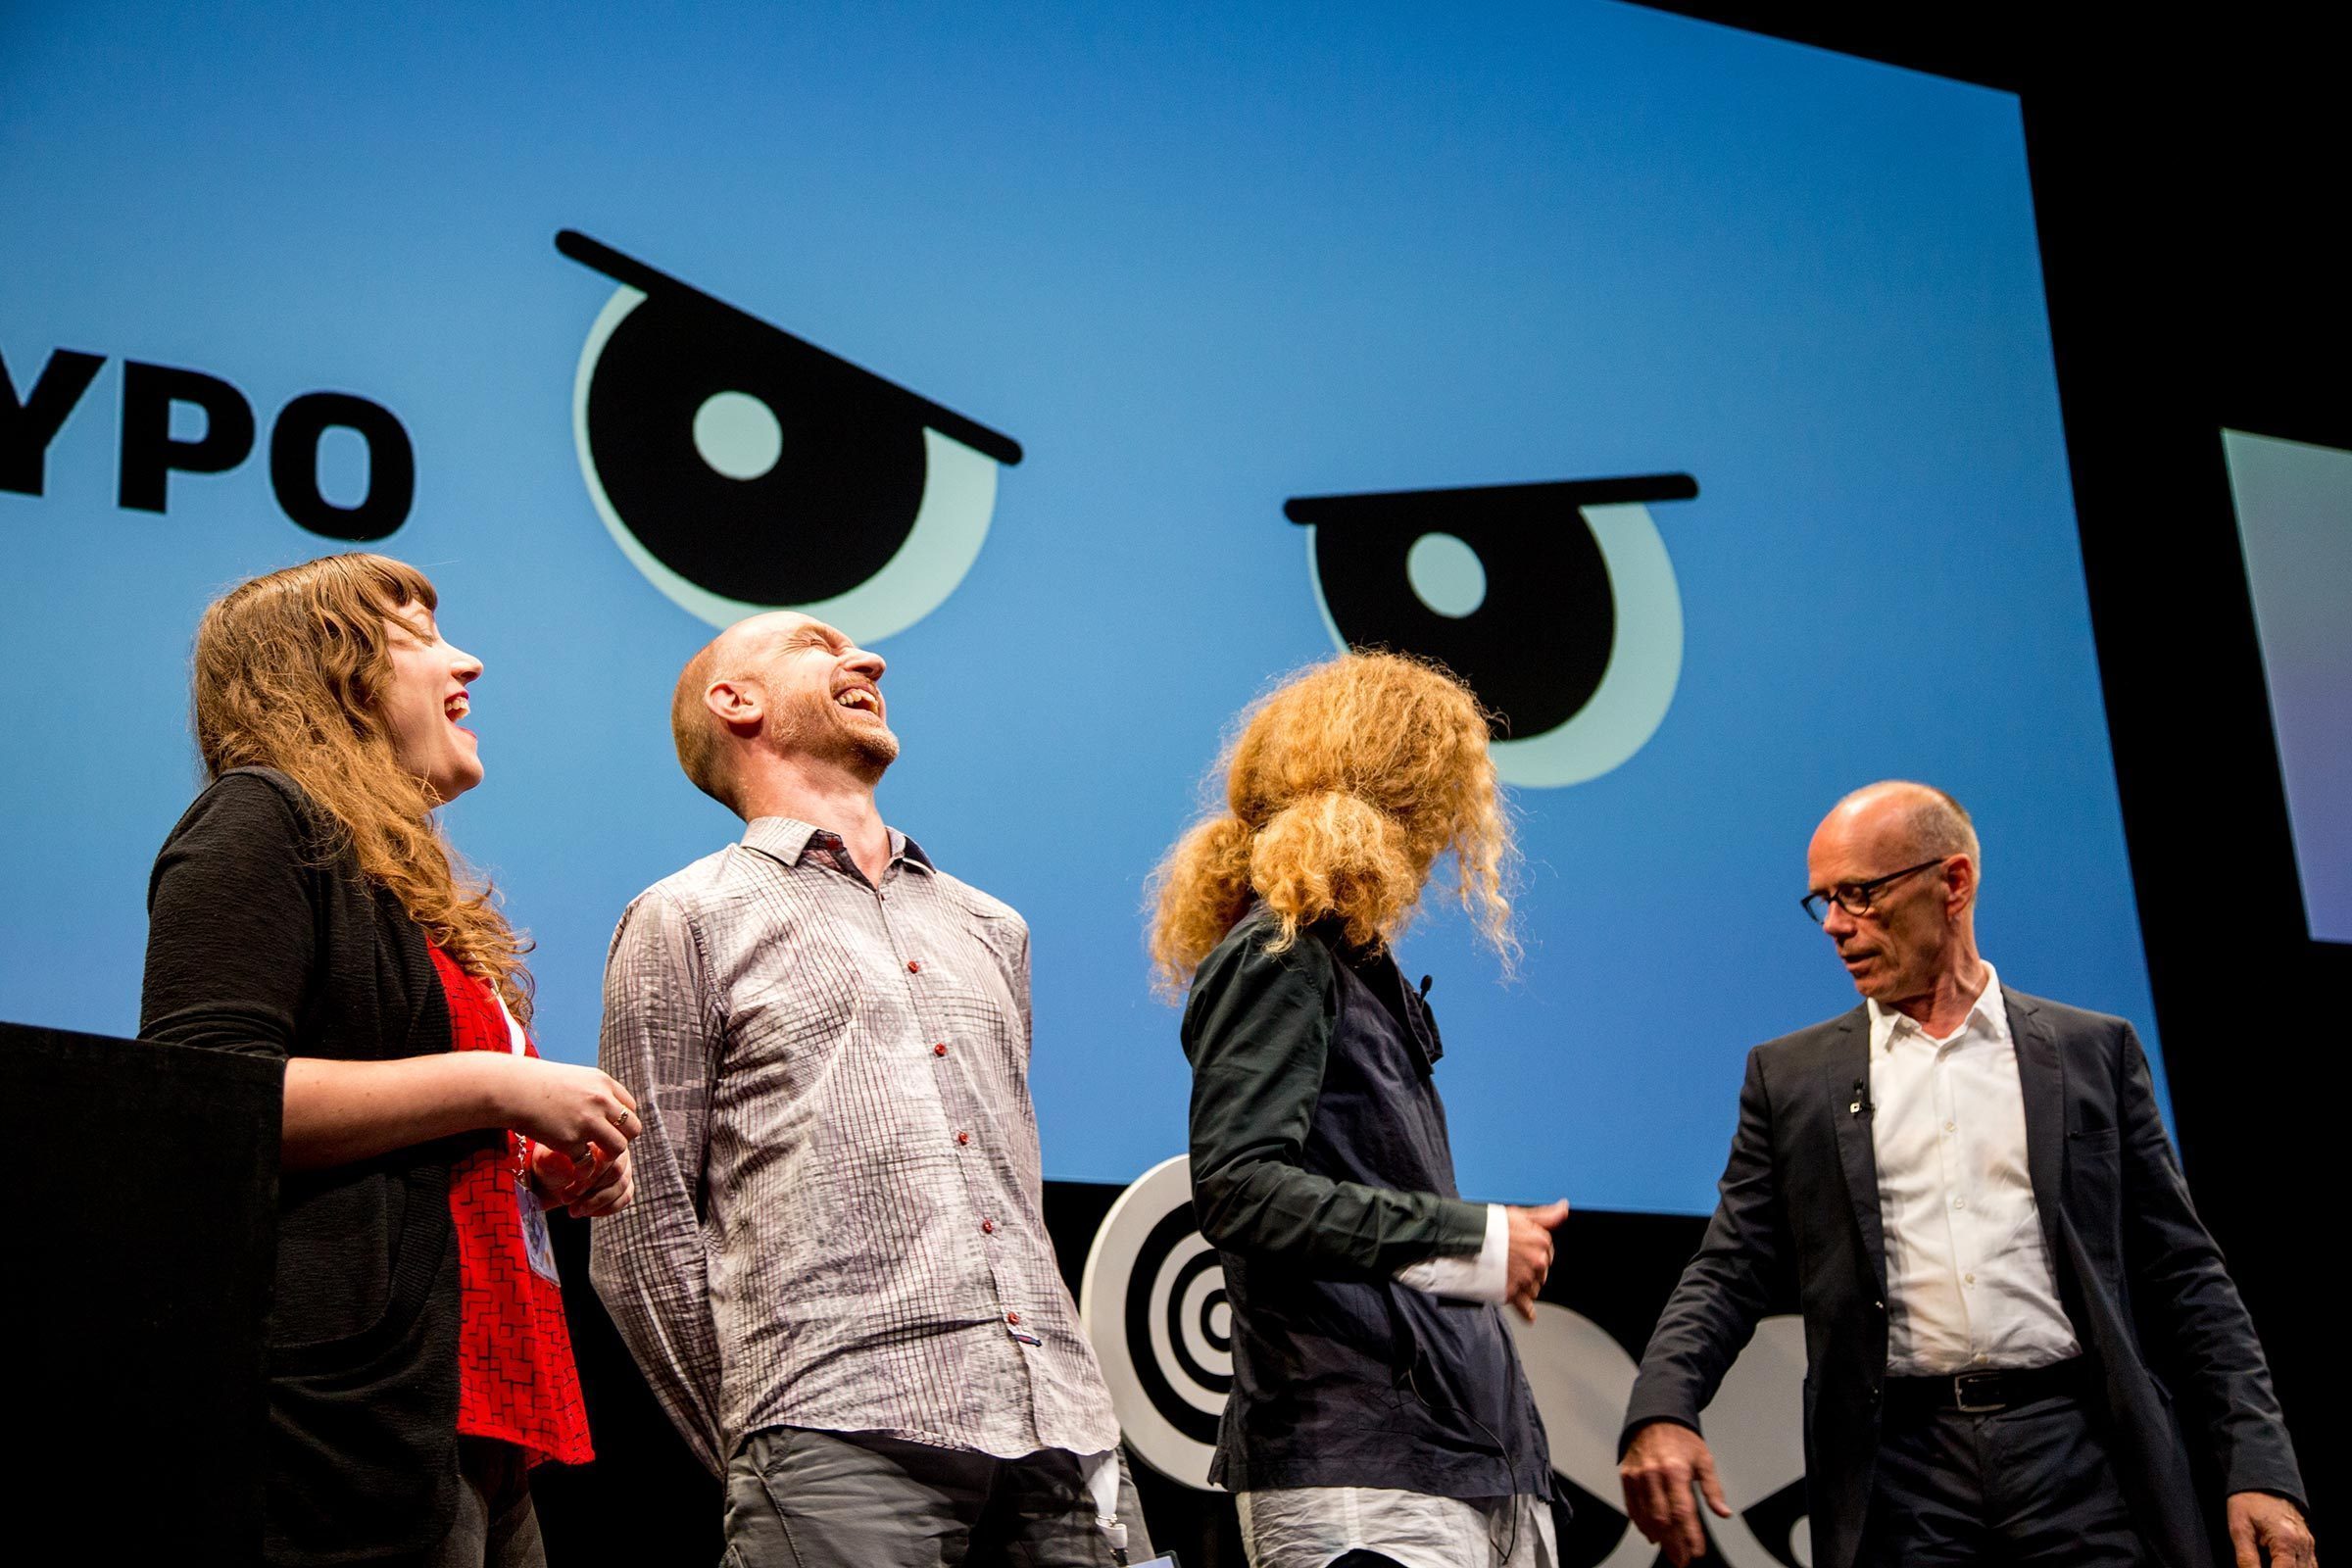 Facilitators Ceci Moss & Yves Peters in the Screening Room, and Kali Nakitas & Erik Spiekermann covering the main stage